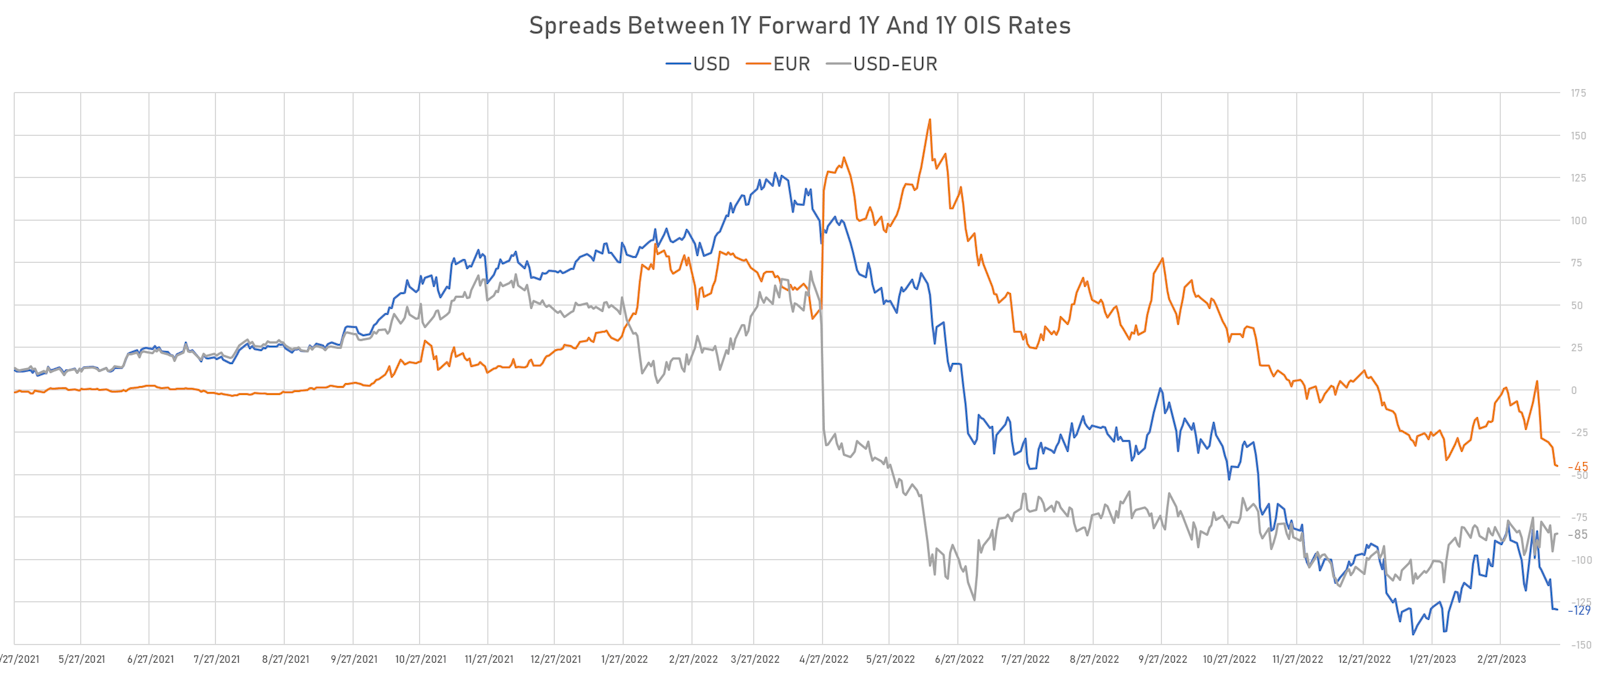 Spreads between 1Y Forward 1Y OIS and 1Y OIS Rates in USD and Euro | Sources: phipost.com, Refinitiv data